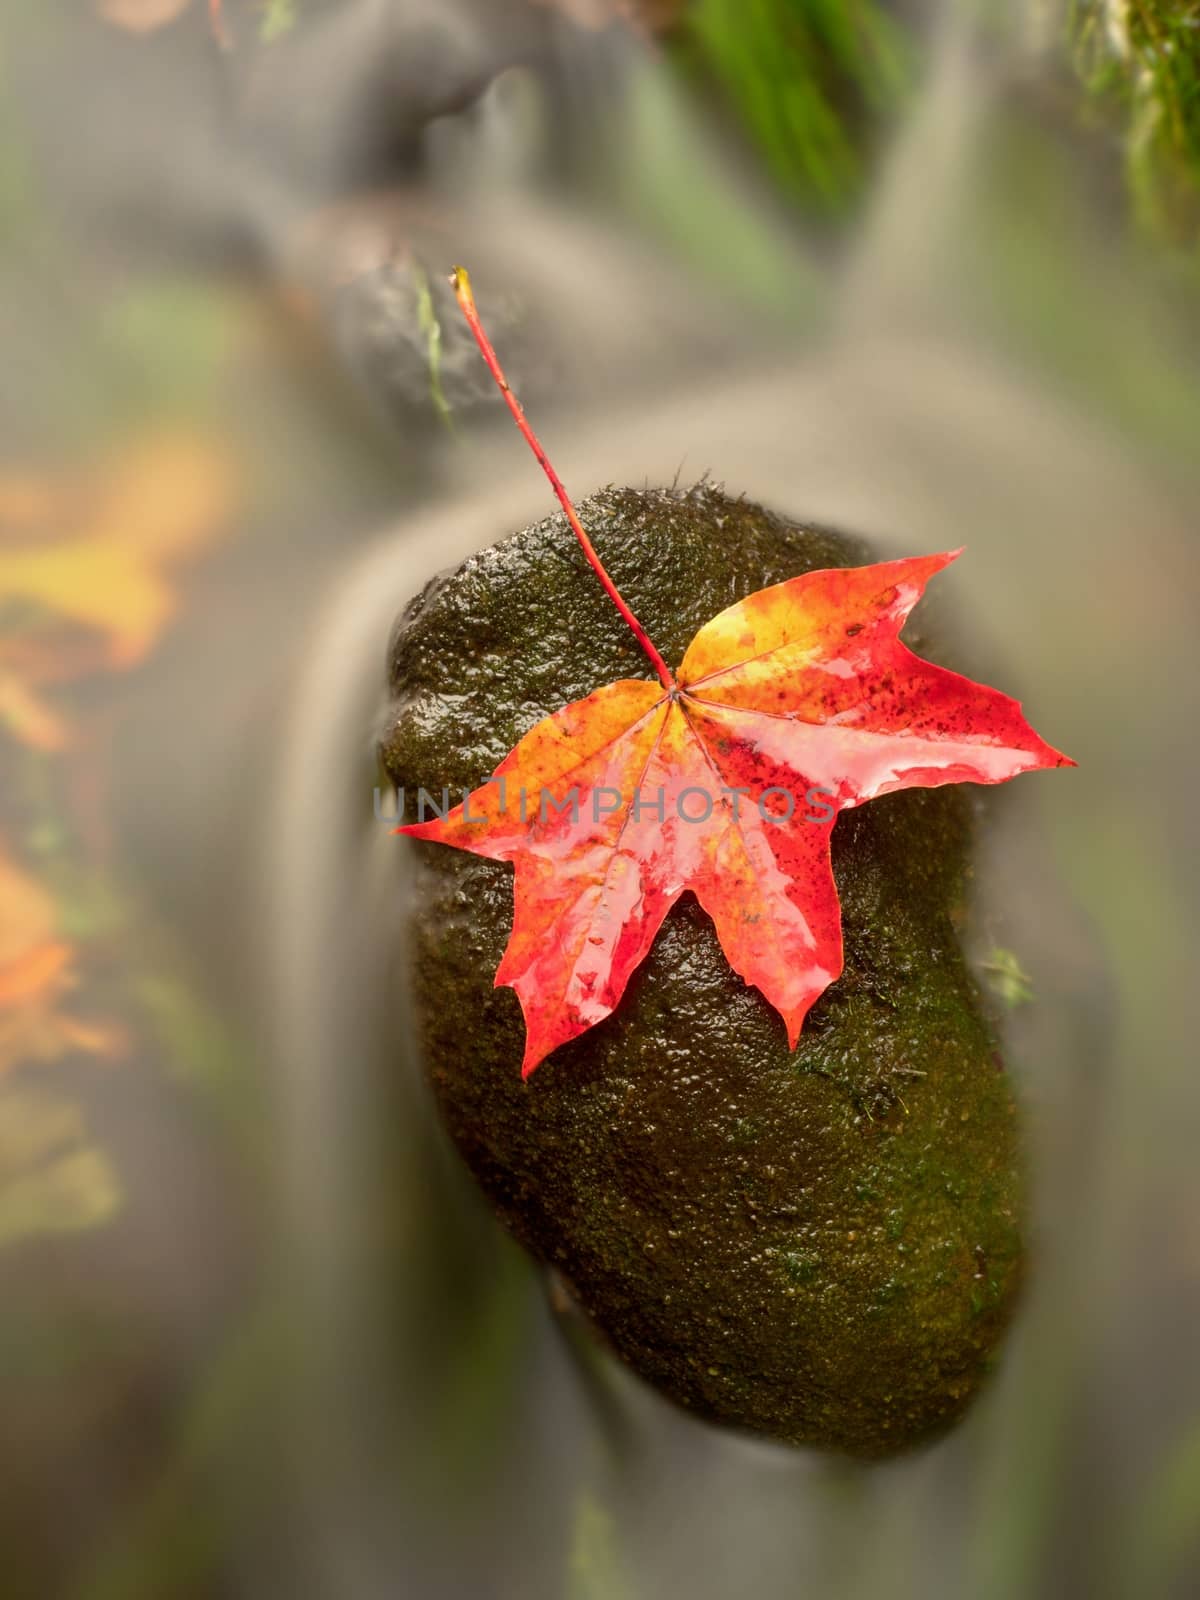 Fallen maple leaf. Rotten yellow orange dotted maple leaf in cold water by rdonar2